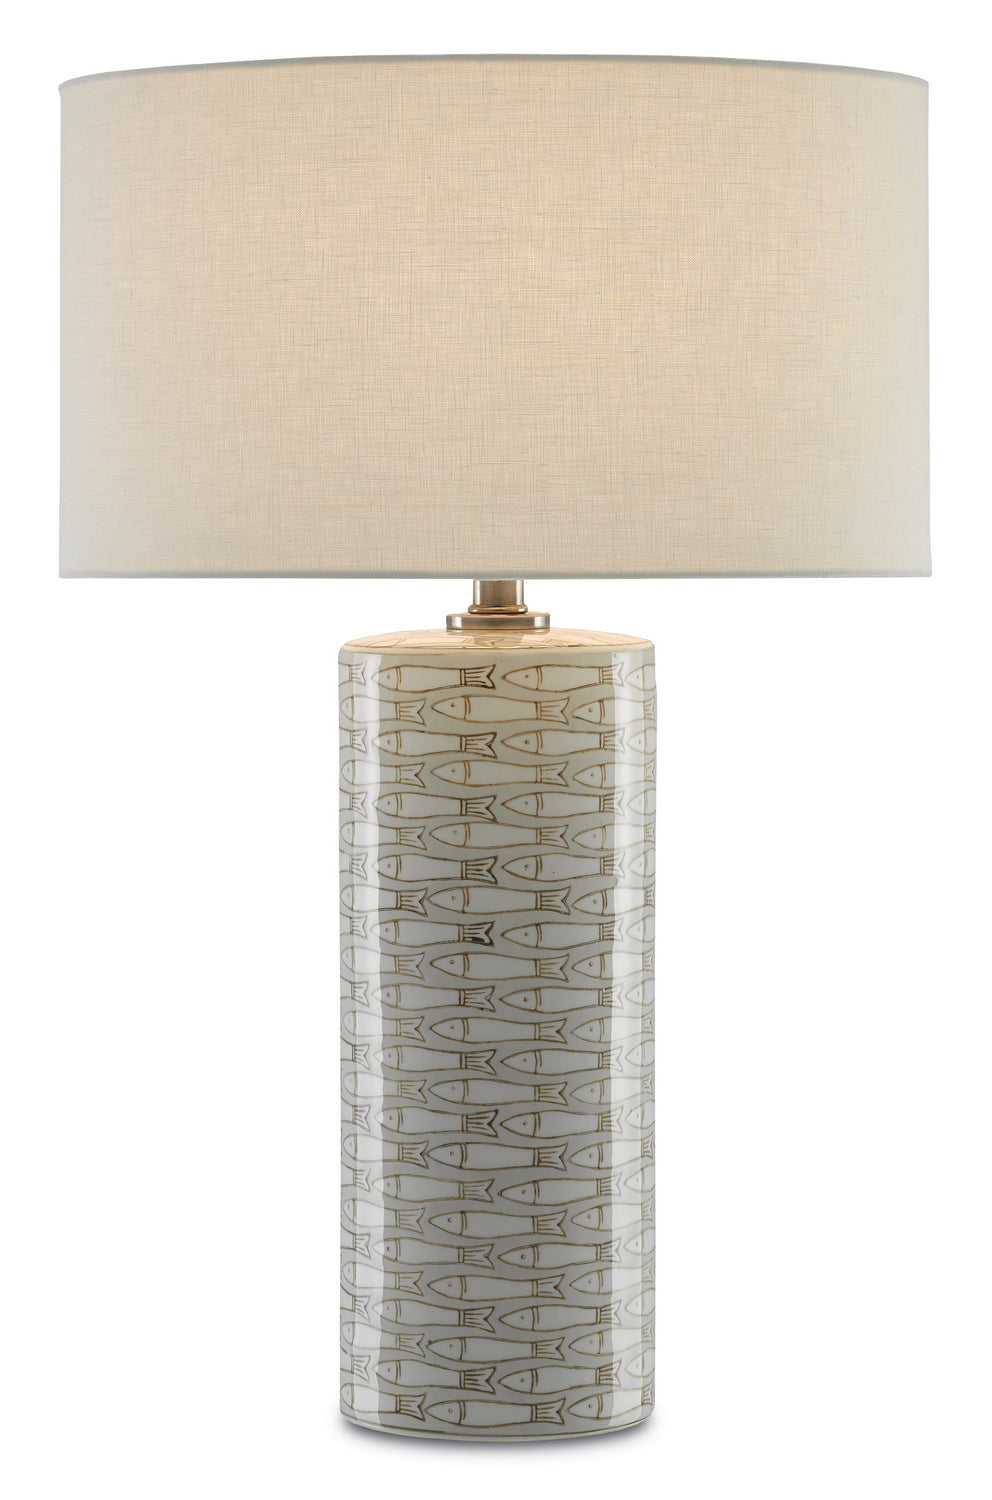 Currey and Company - One Light Table Lamp - Fisch - Gray/White/Antique Nickel- Union Lighting Luminaires Decor